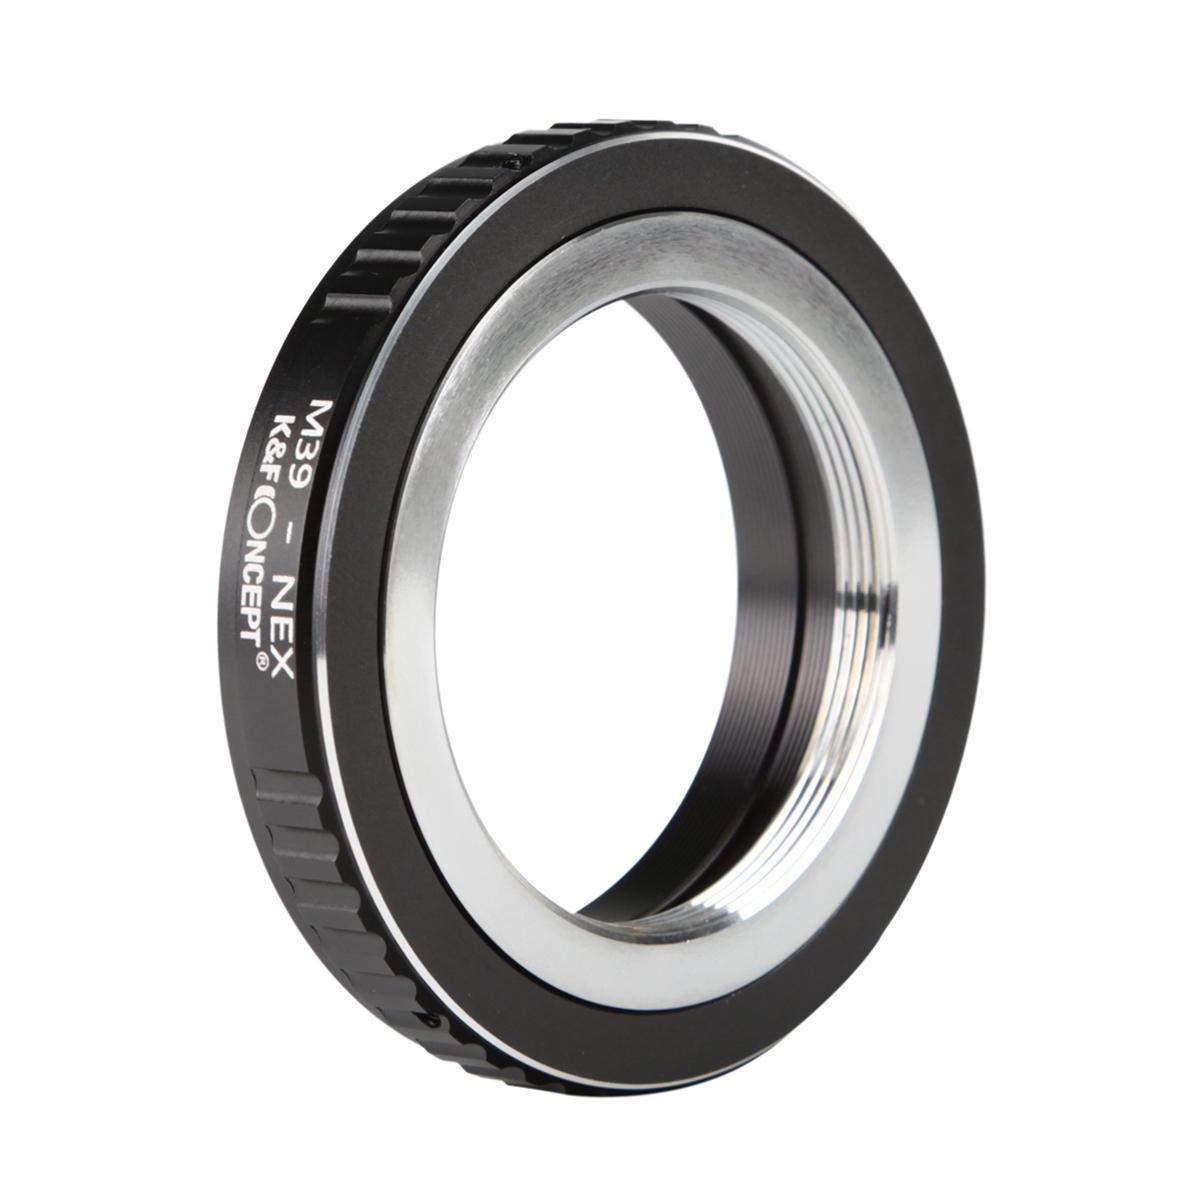 Product Image of  Lens Mount Adapter for M39 Mount to Sony NEX Camera Body K&F Concept Non-SLR port M39